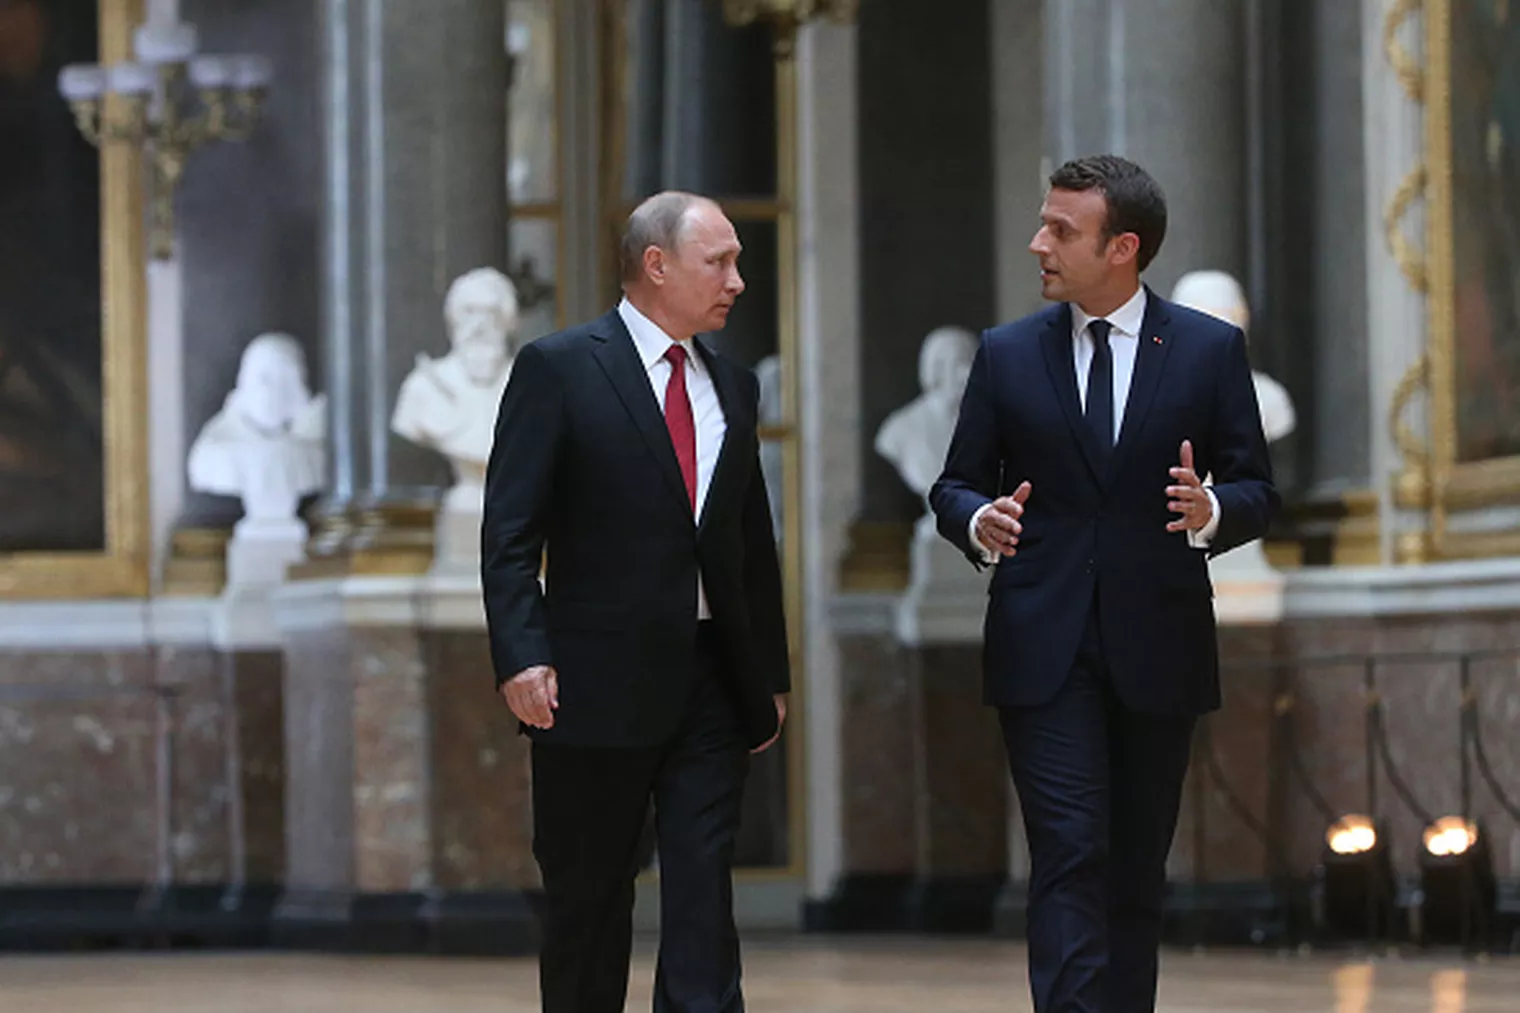 Balls of Steel! Freakout Nation: Macron humiliates Putin in front of crowd (freakoutnation.com)